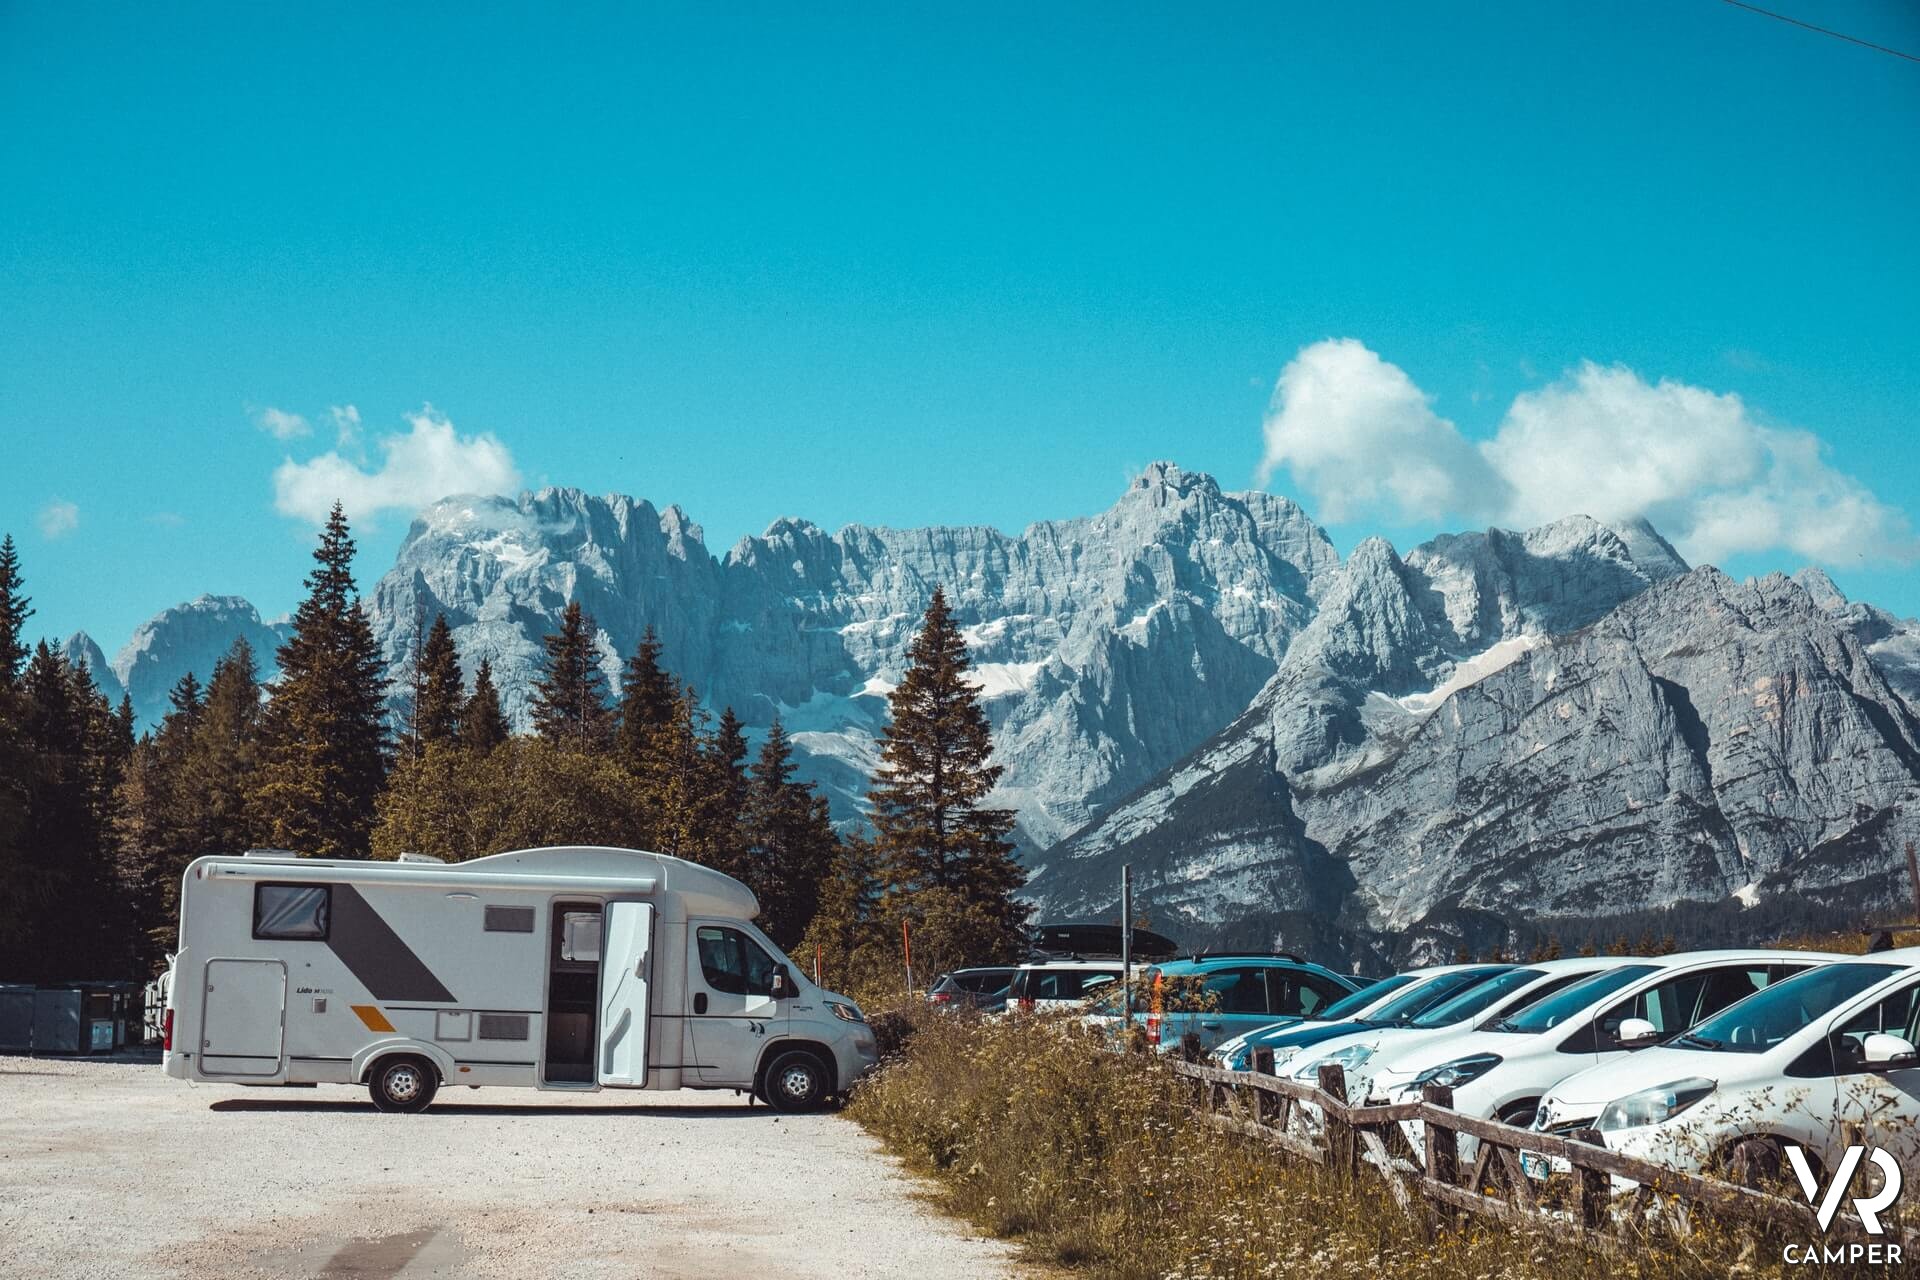 Used camper - Used motorhomes - How to sell a used motorhome at a dealership